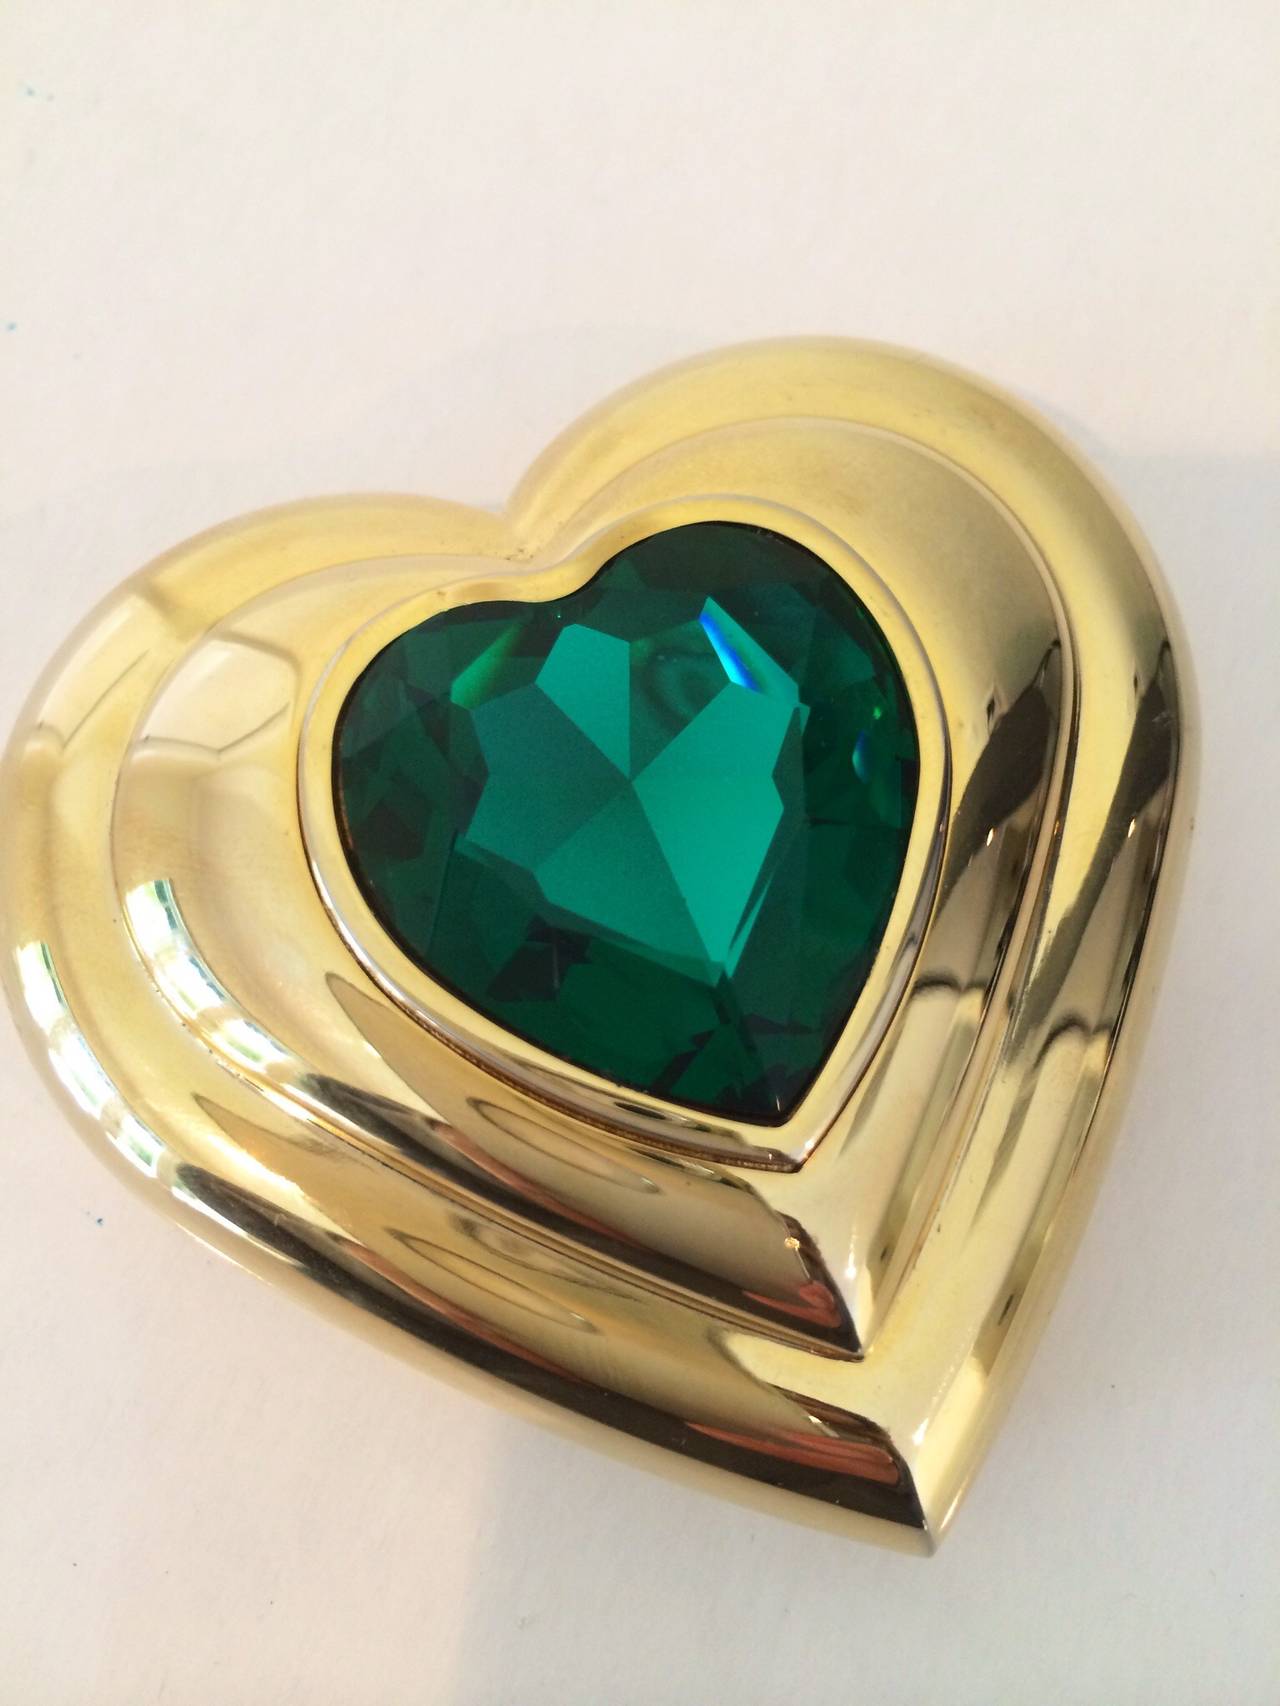 Yves Saint Laurent  Dazzling Emerald Green Crystal  Jewel Heart Compact YSL For Sale 4